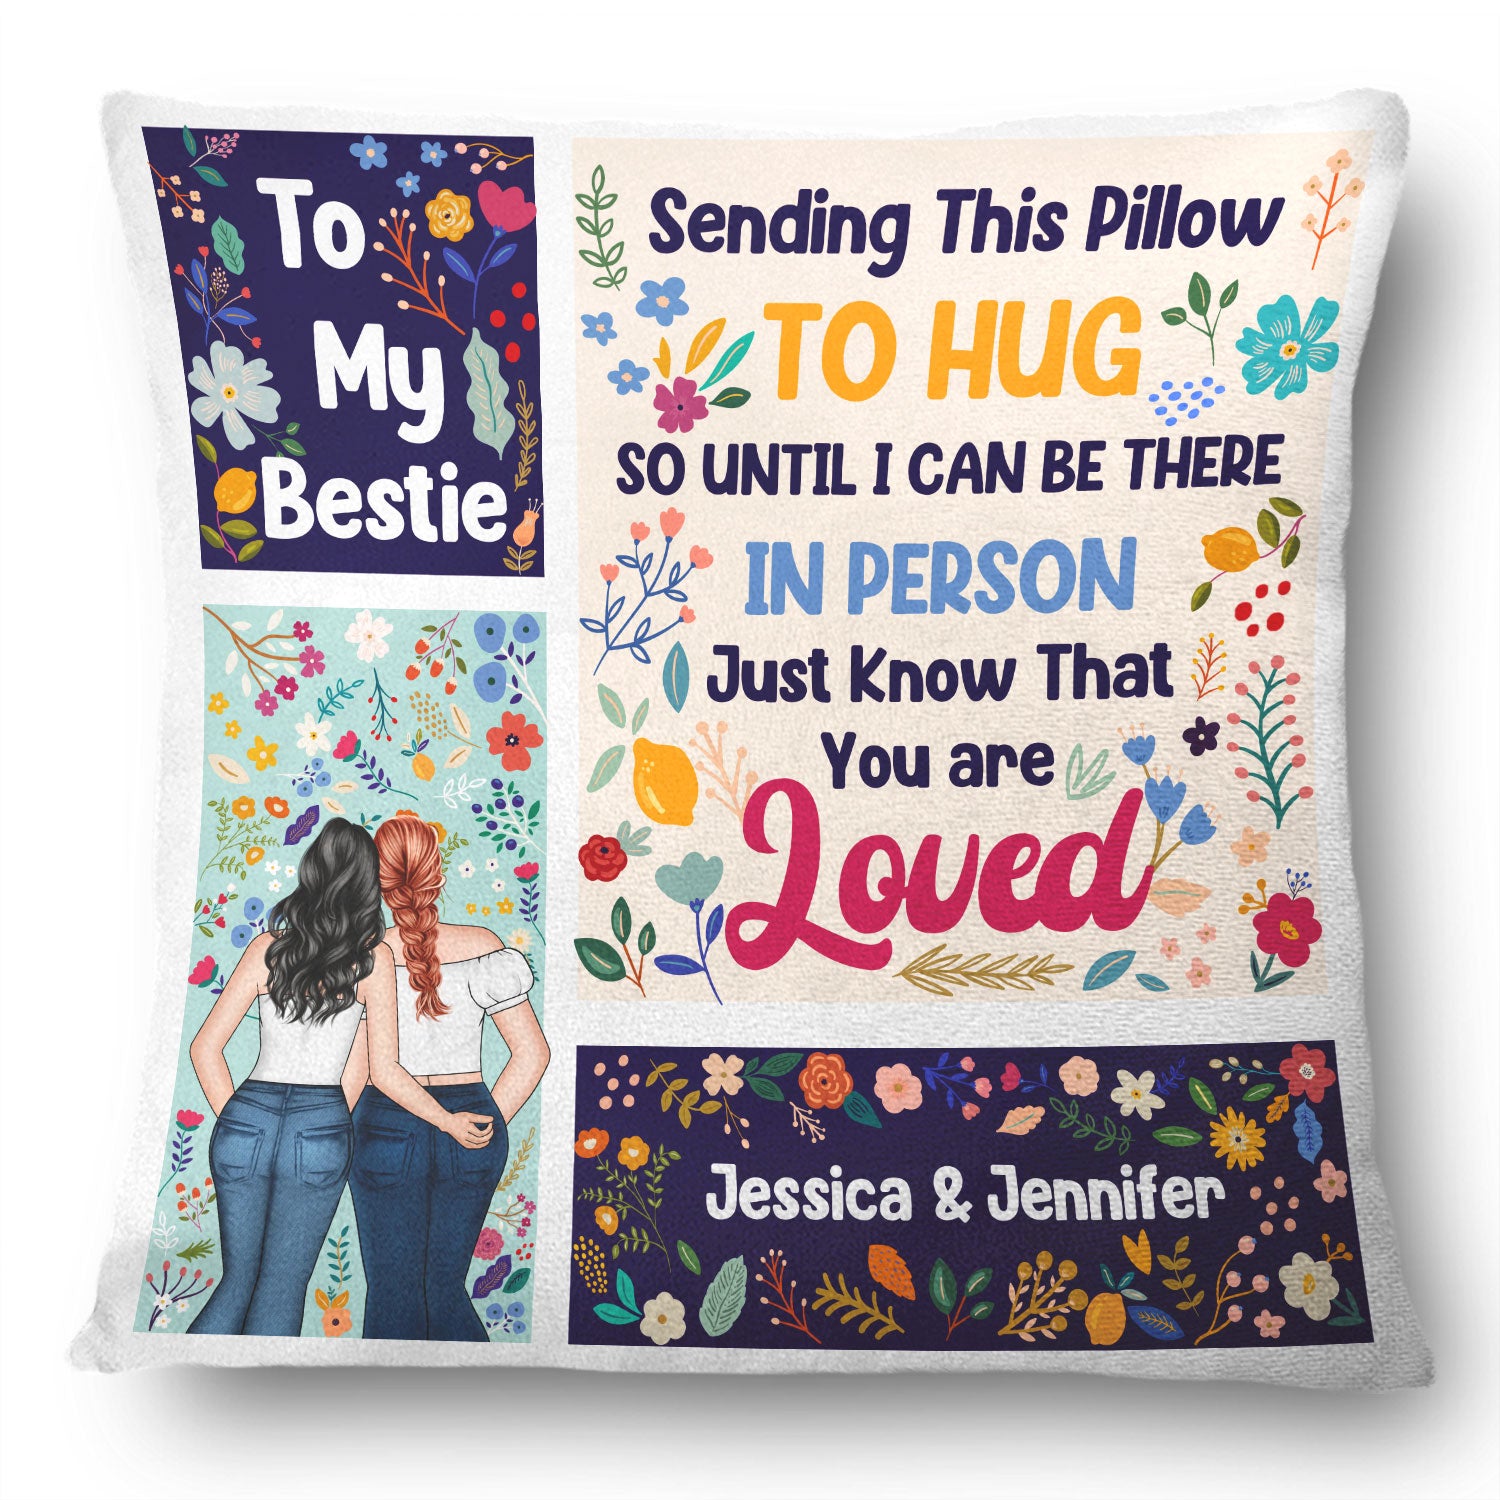 Be There In Person - Gift For Sisters And Best Friends - Personalized Pillow